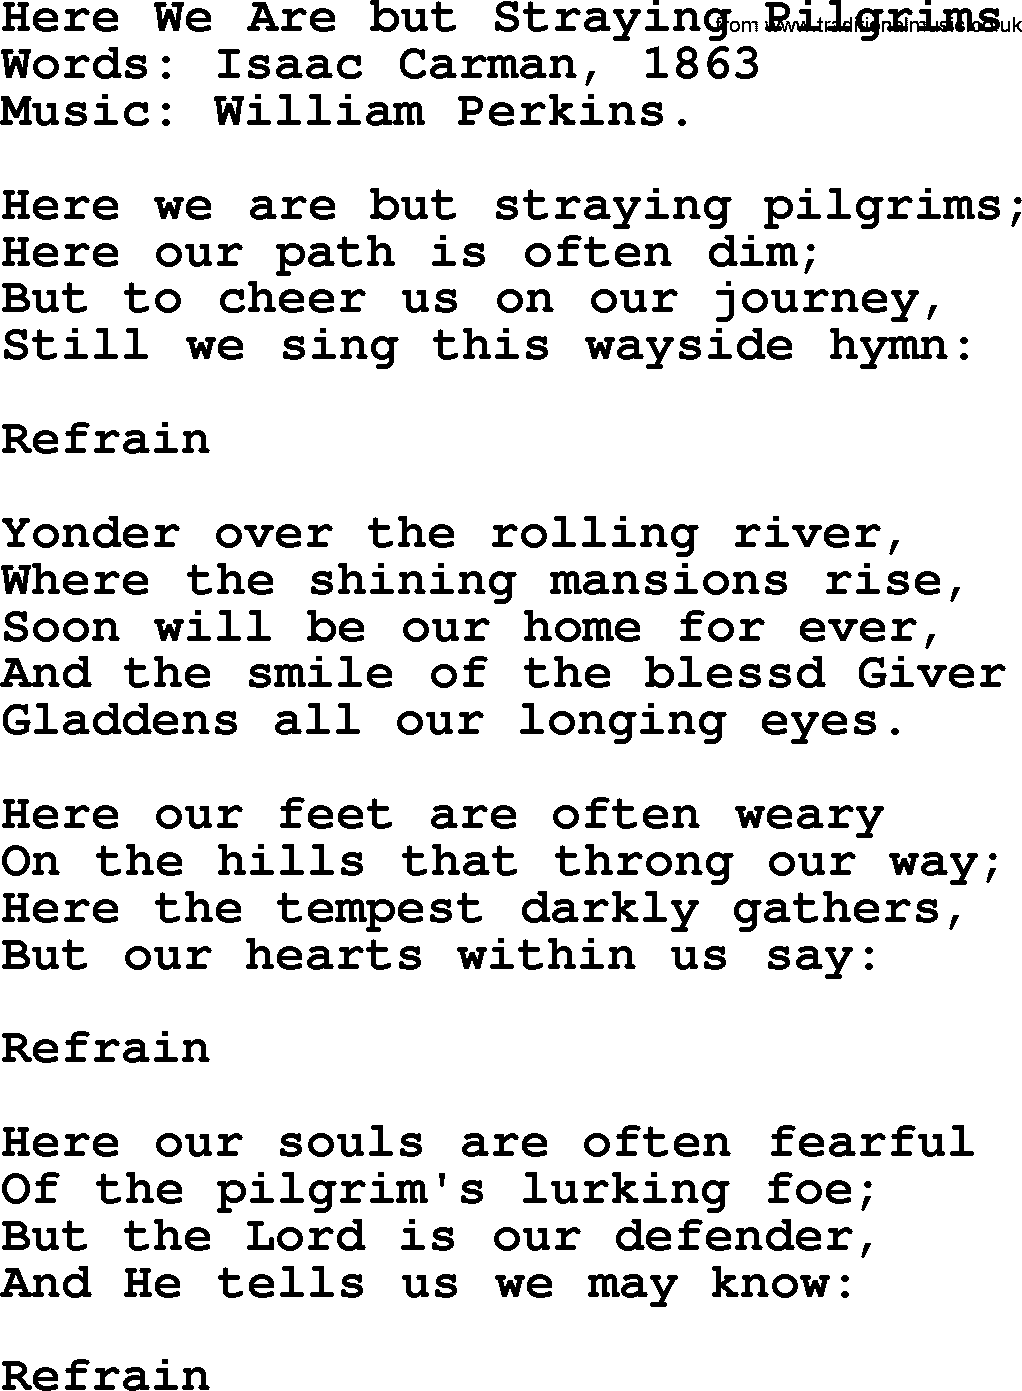 Songs and Hymns about Heaven: Here We Are But Straying Pilgrims lyrics with PDF